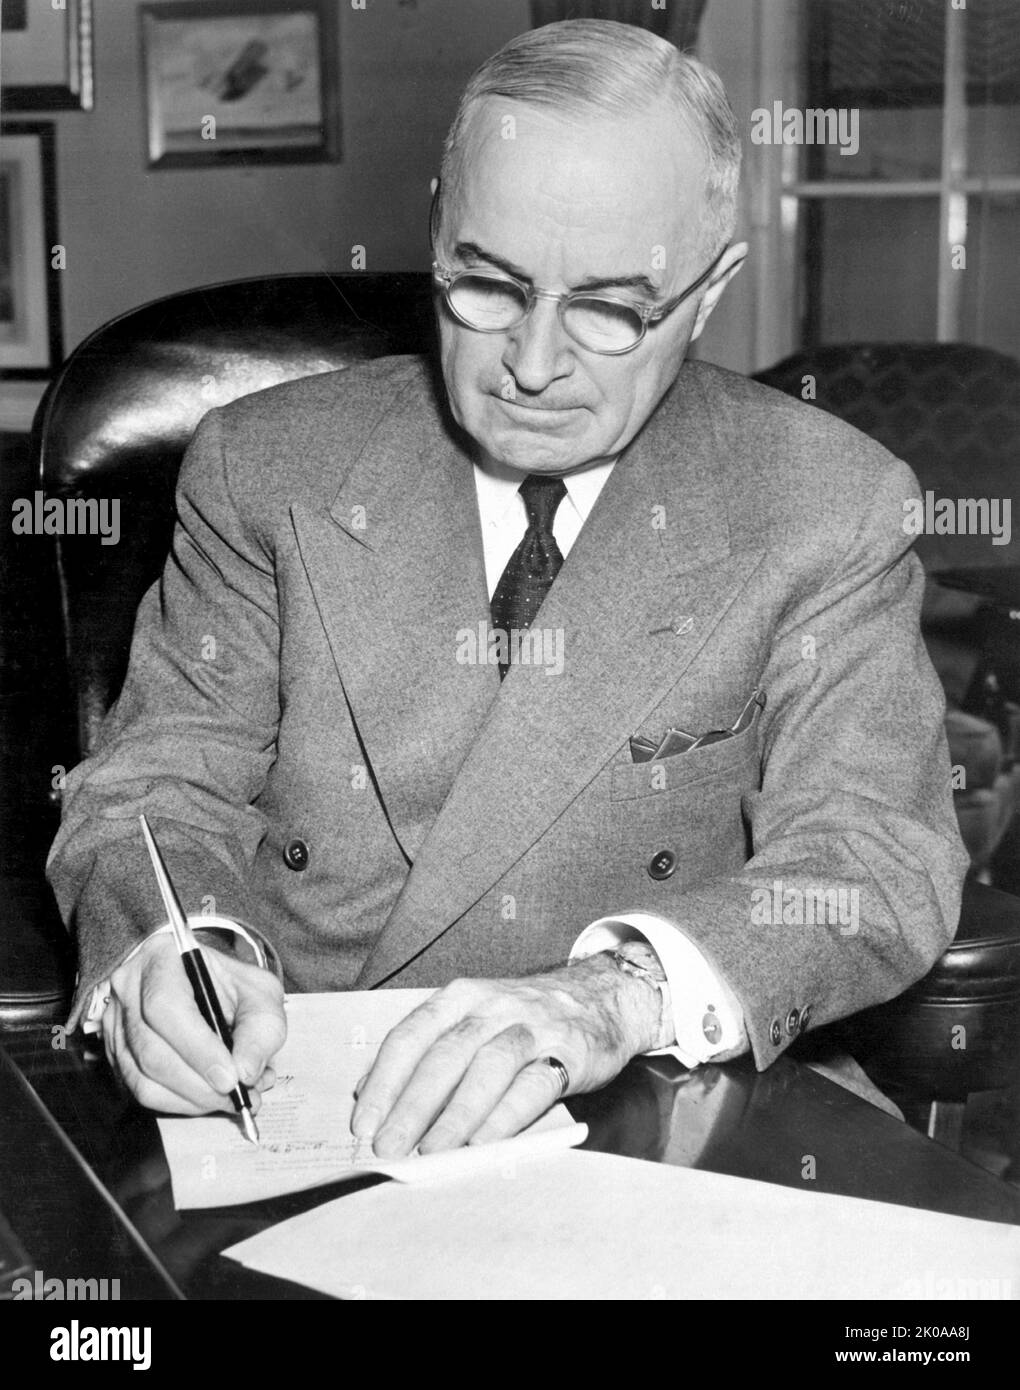 Harry S. Truman (May 8, 1884 - December 26, 1972) was the 33rd president of the United States, serving from 1945 to 1953. A lifetime member of the Democratic Party, he previously served as the 34th vice president under Franklin Roosevelt, and as a United States Senator from Missouri Stock Photo